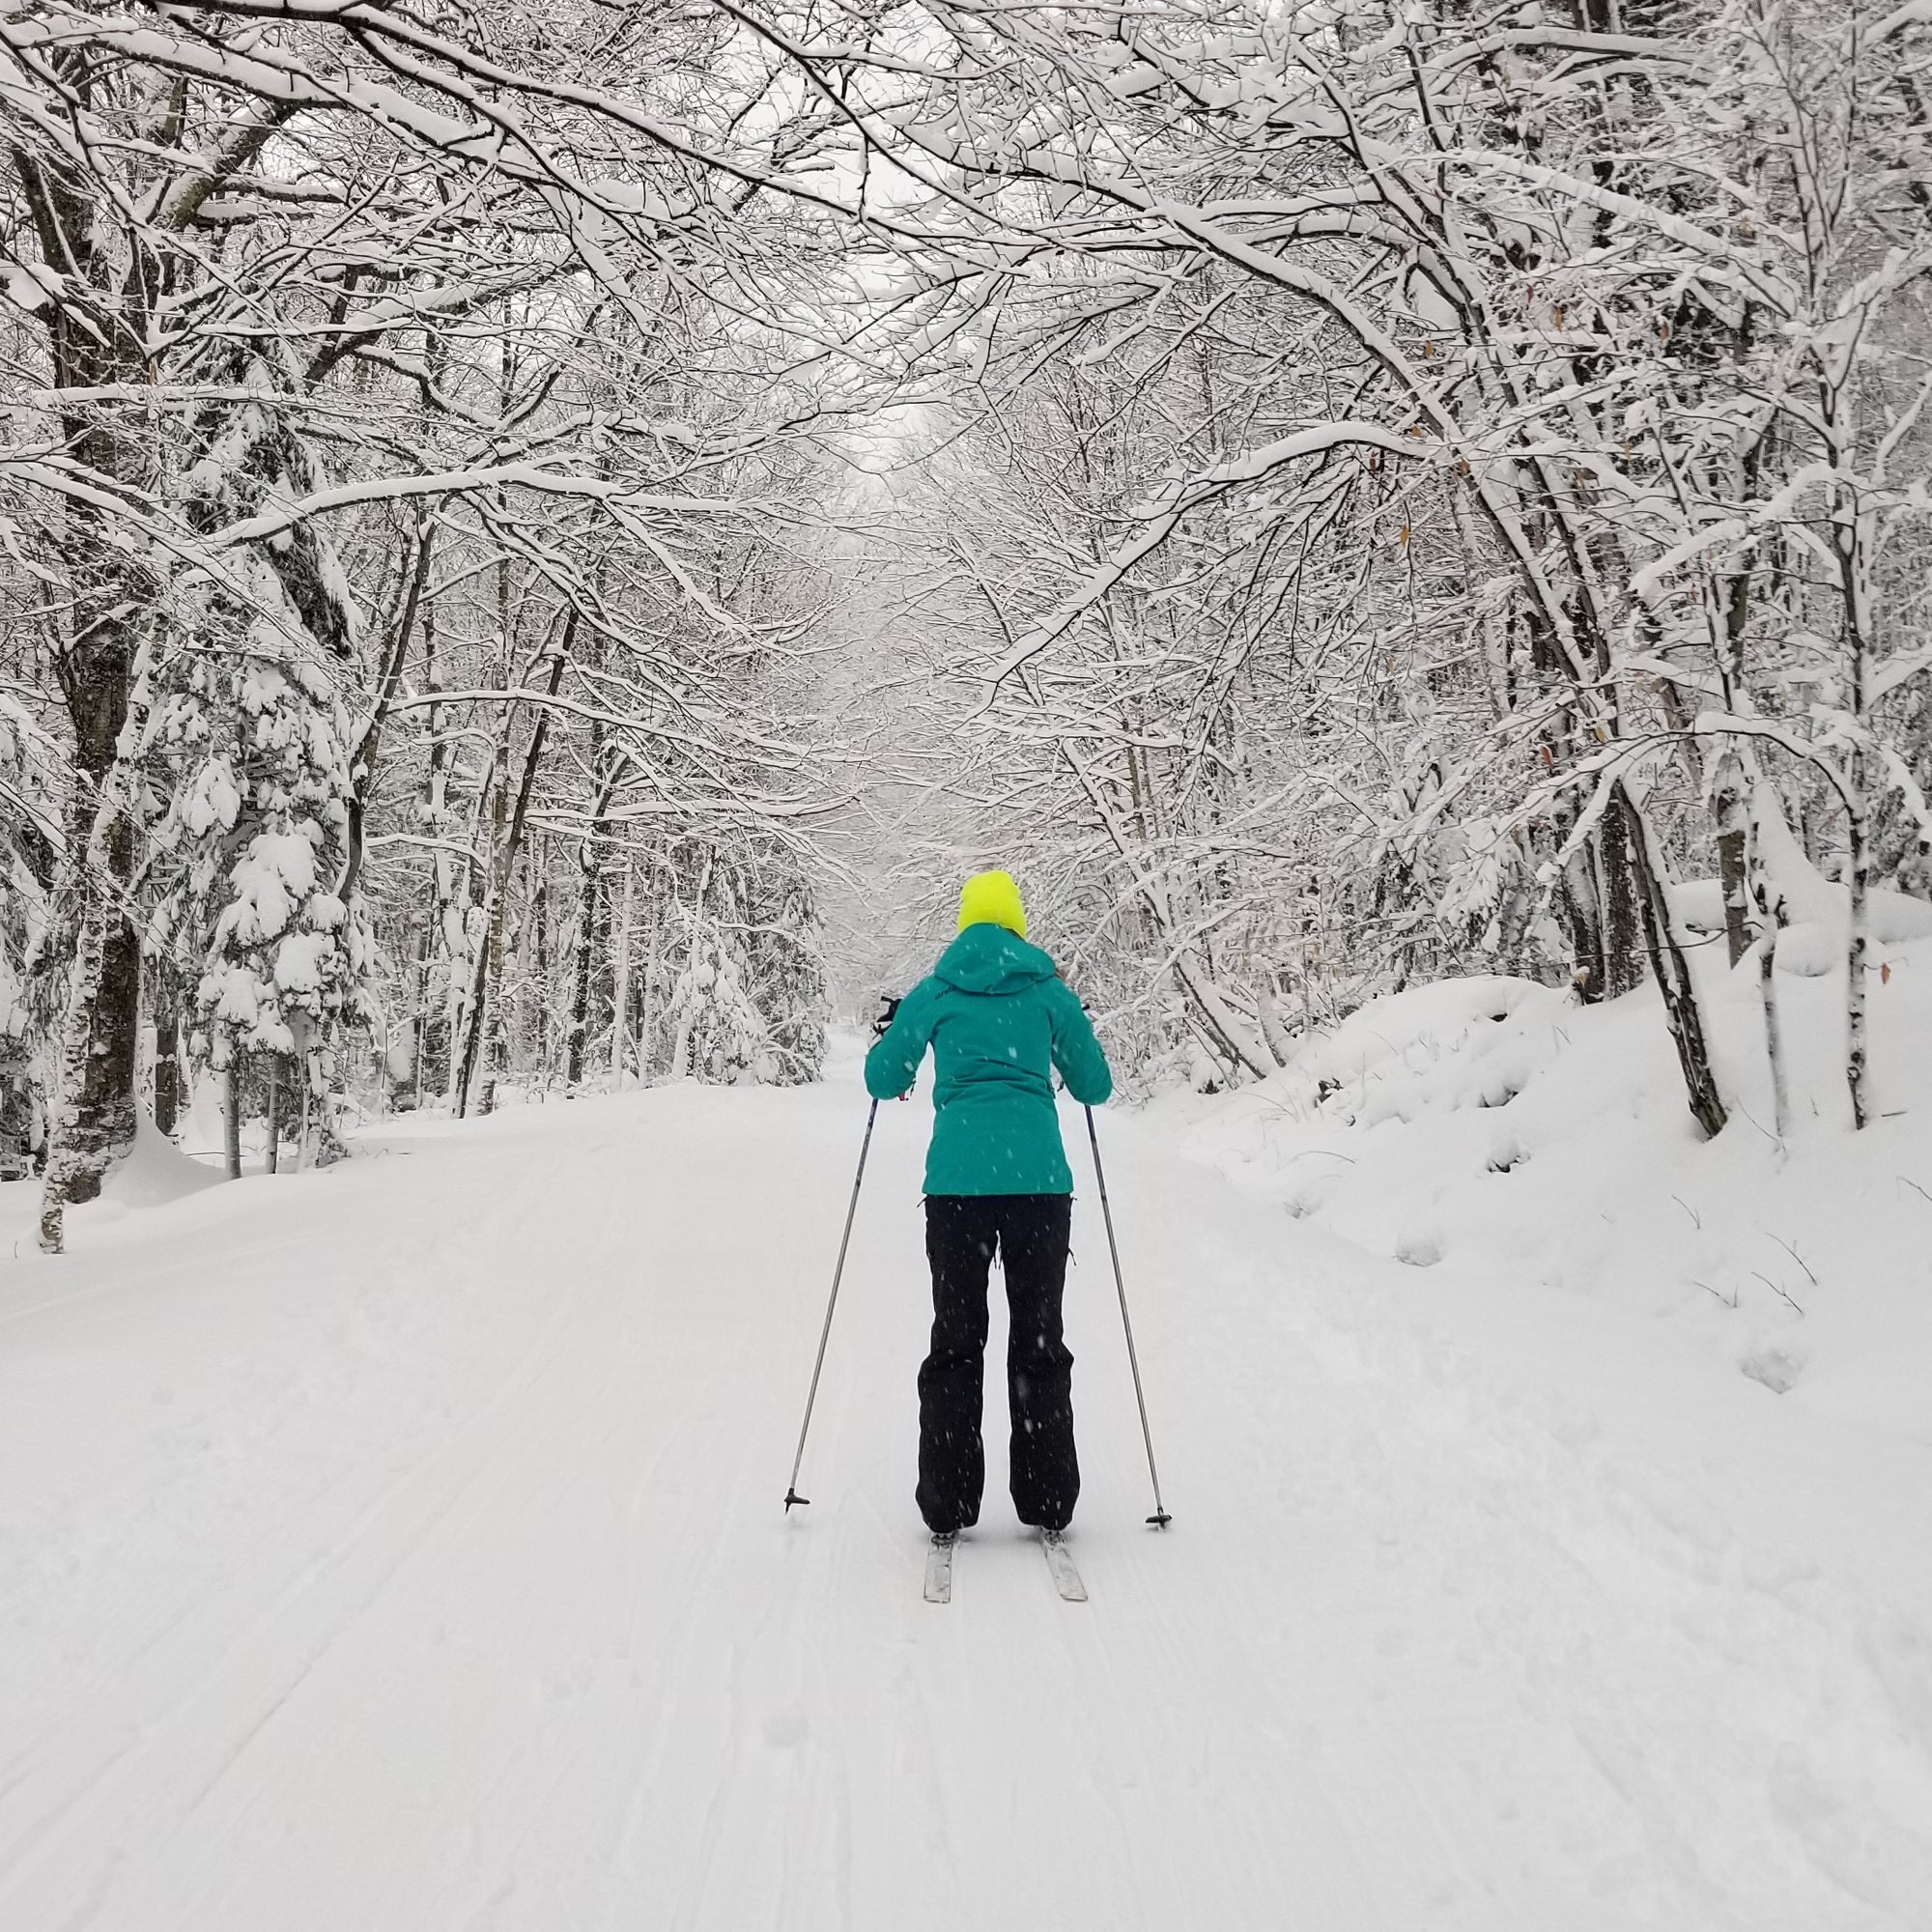 A cross country skier wearing a teal jacket and bright yellow hat, skiing on a snowy trail